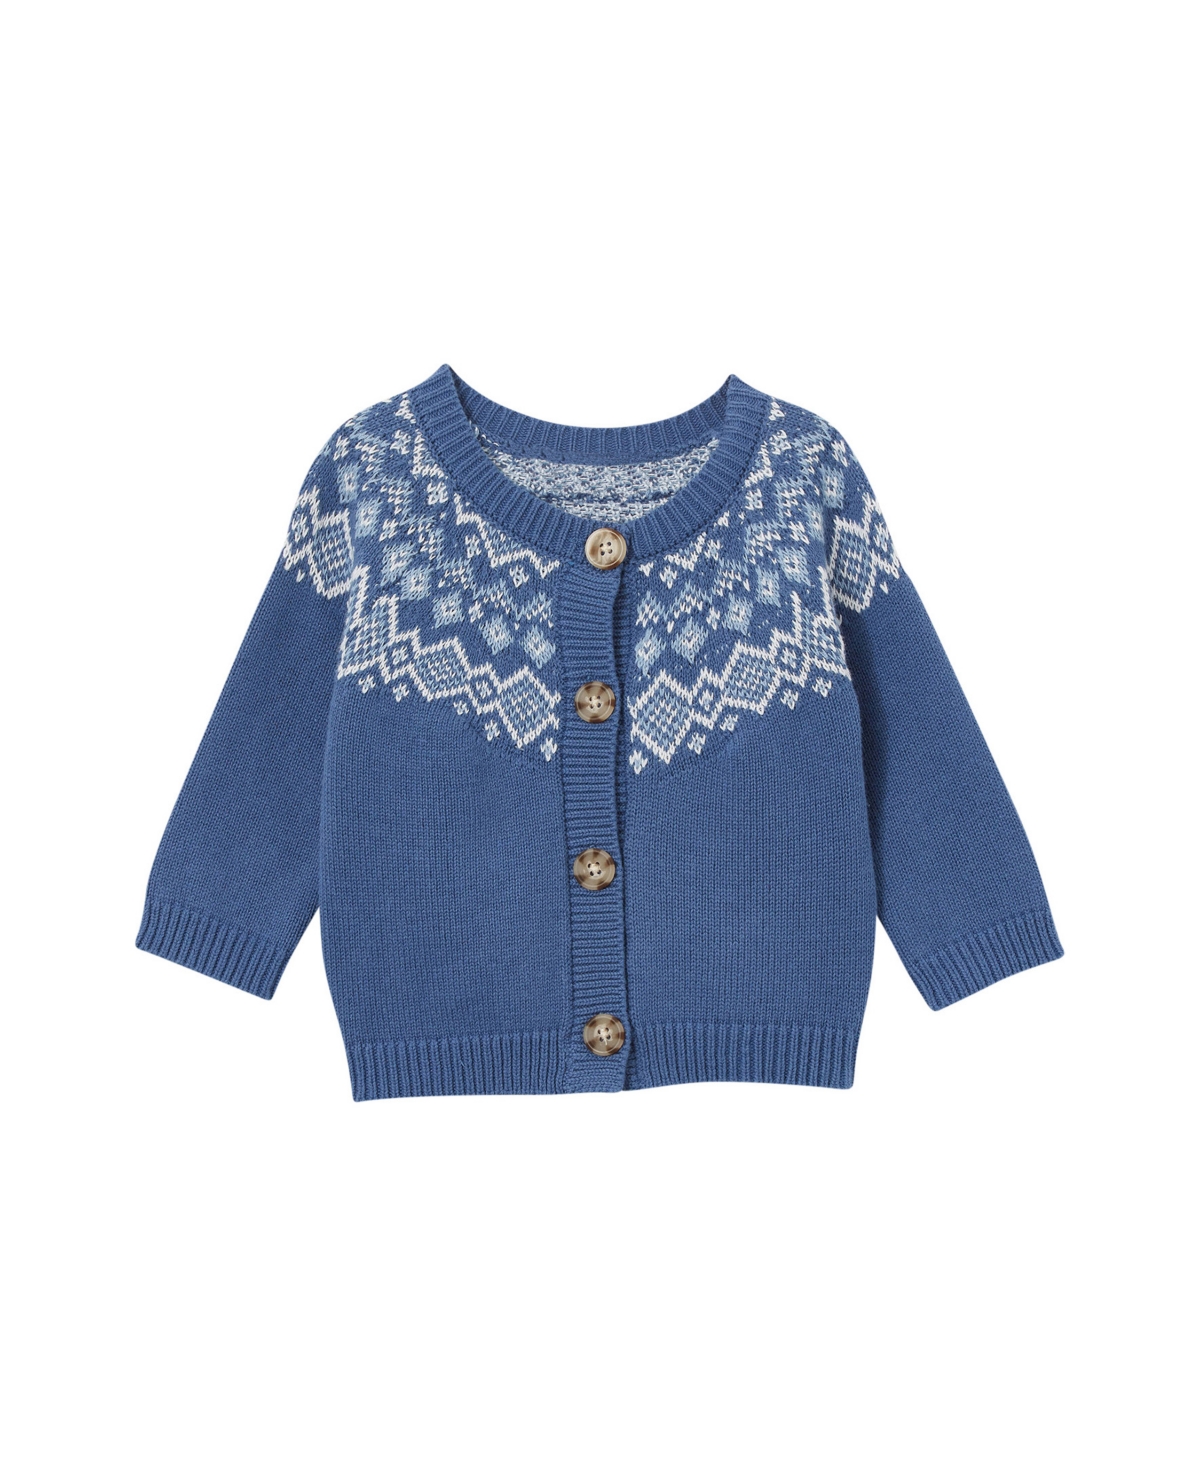 Cotton On Baby Boys And Baby Girls Finley Raglan Jacquard Knit Cardigan Sweater In Petty Blue